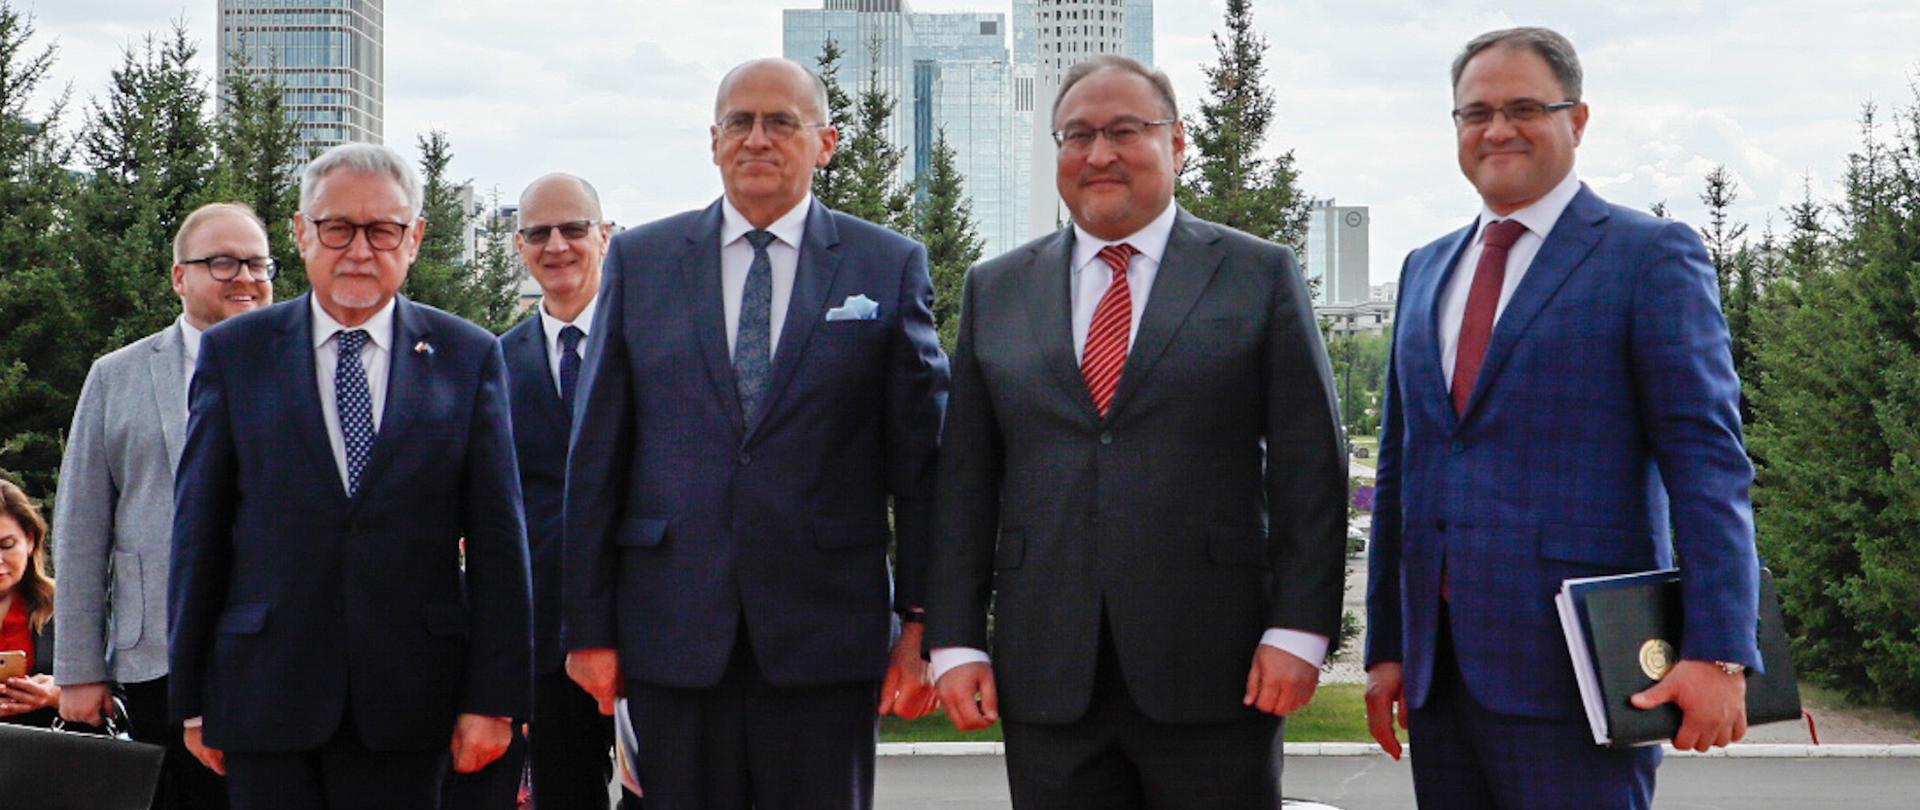 Polish Foreign Minister Zbigniew Rau visited Kazakhstan in his capacity as OSCE Chairman-in-Office